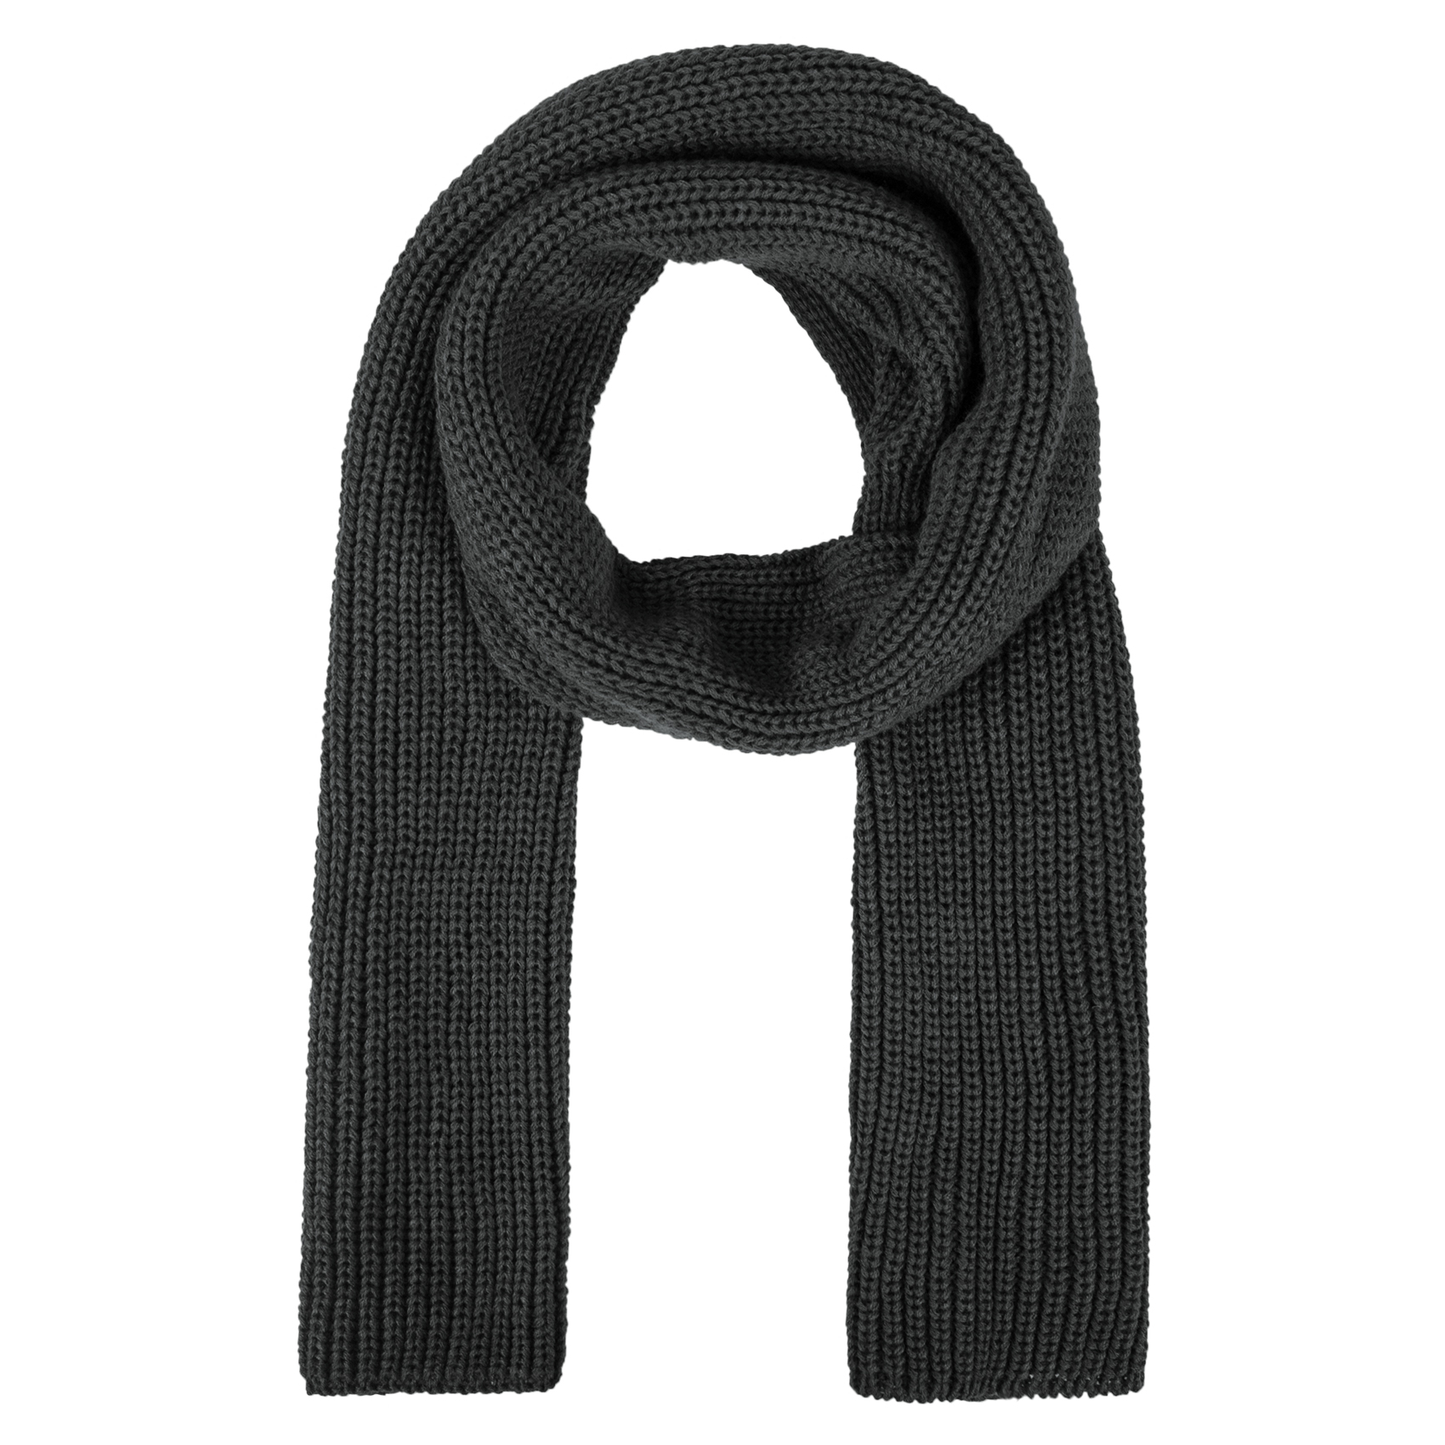 Loritta Scarf for Women and Men, Winter Thick Soft Knit Womens Scarves and Shawl